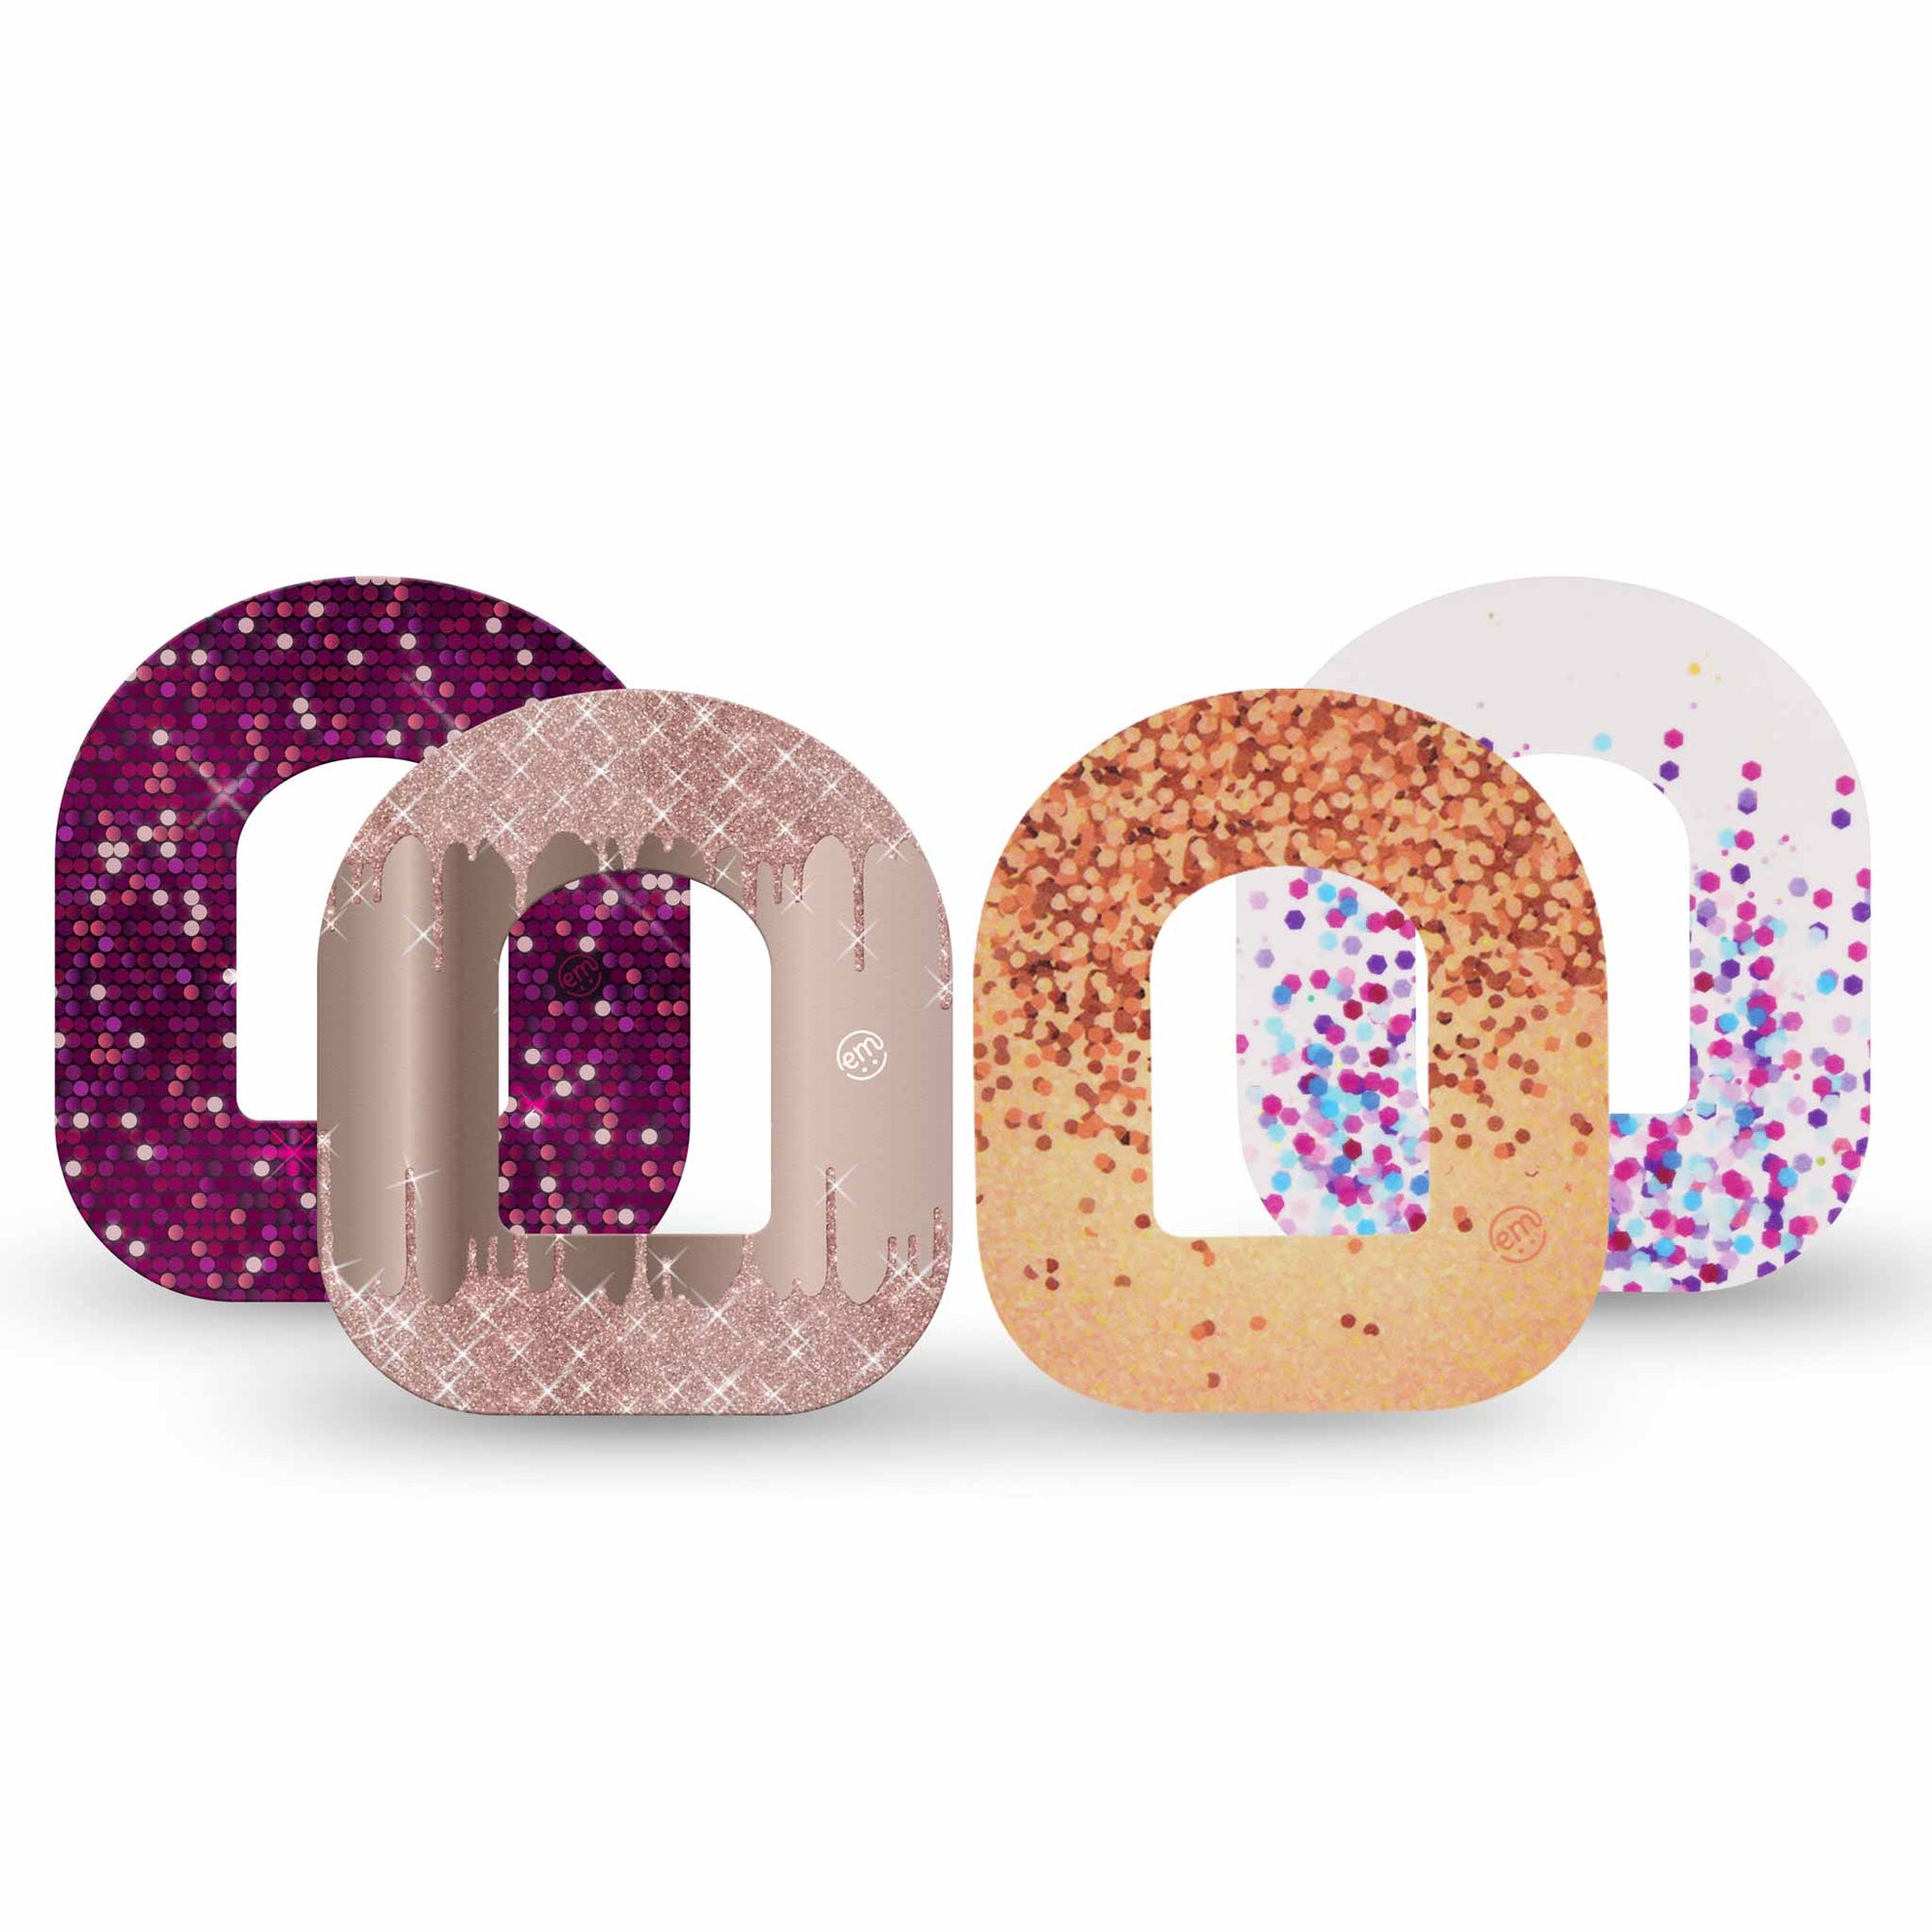 ExpressionMed Glitter Bomb Variety Pack Pod Tape